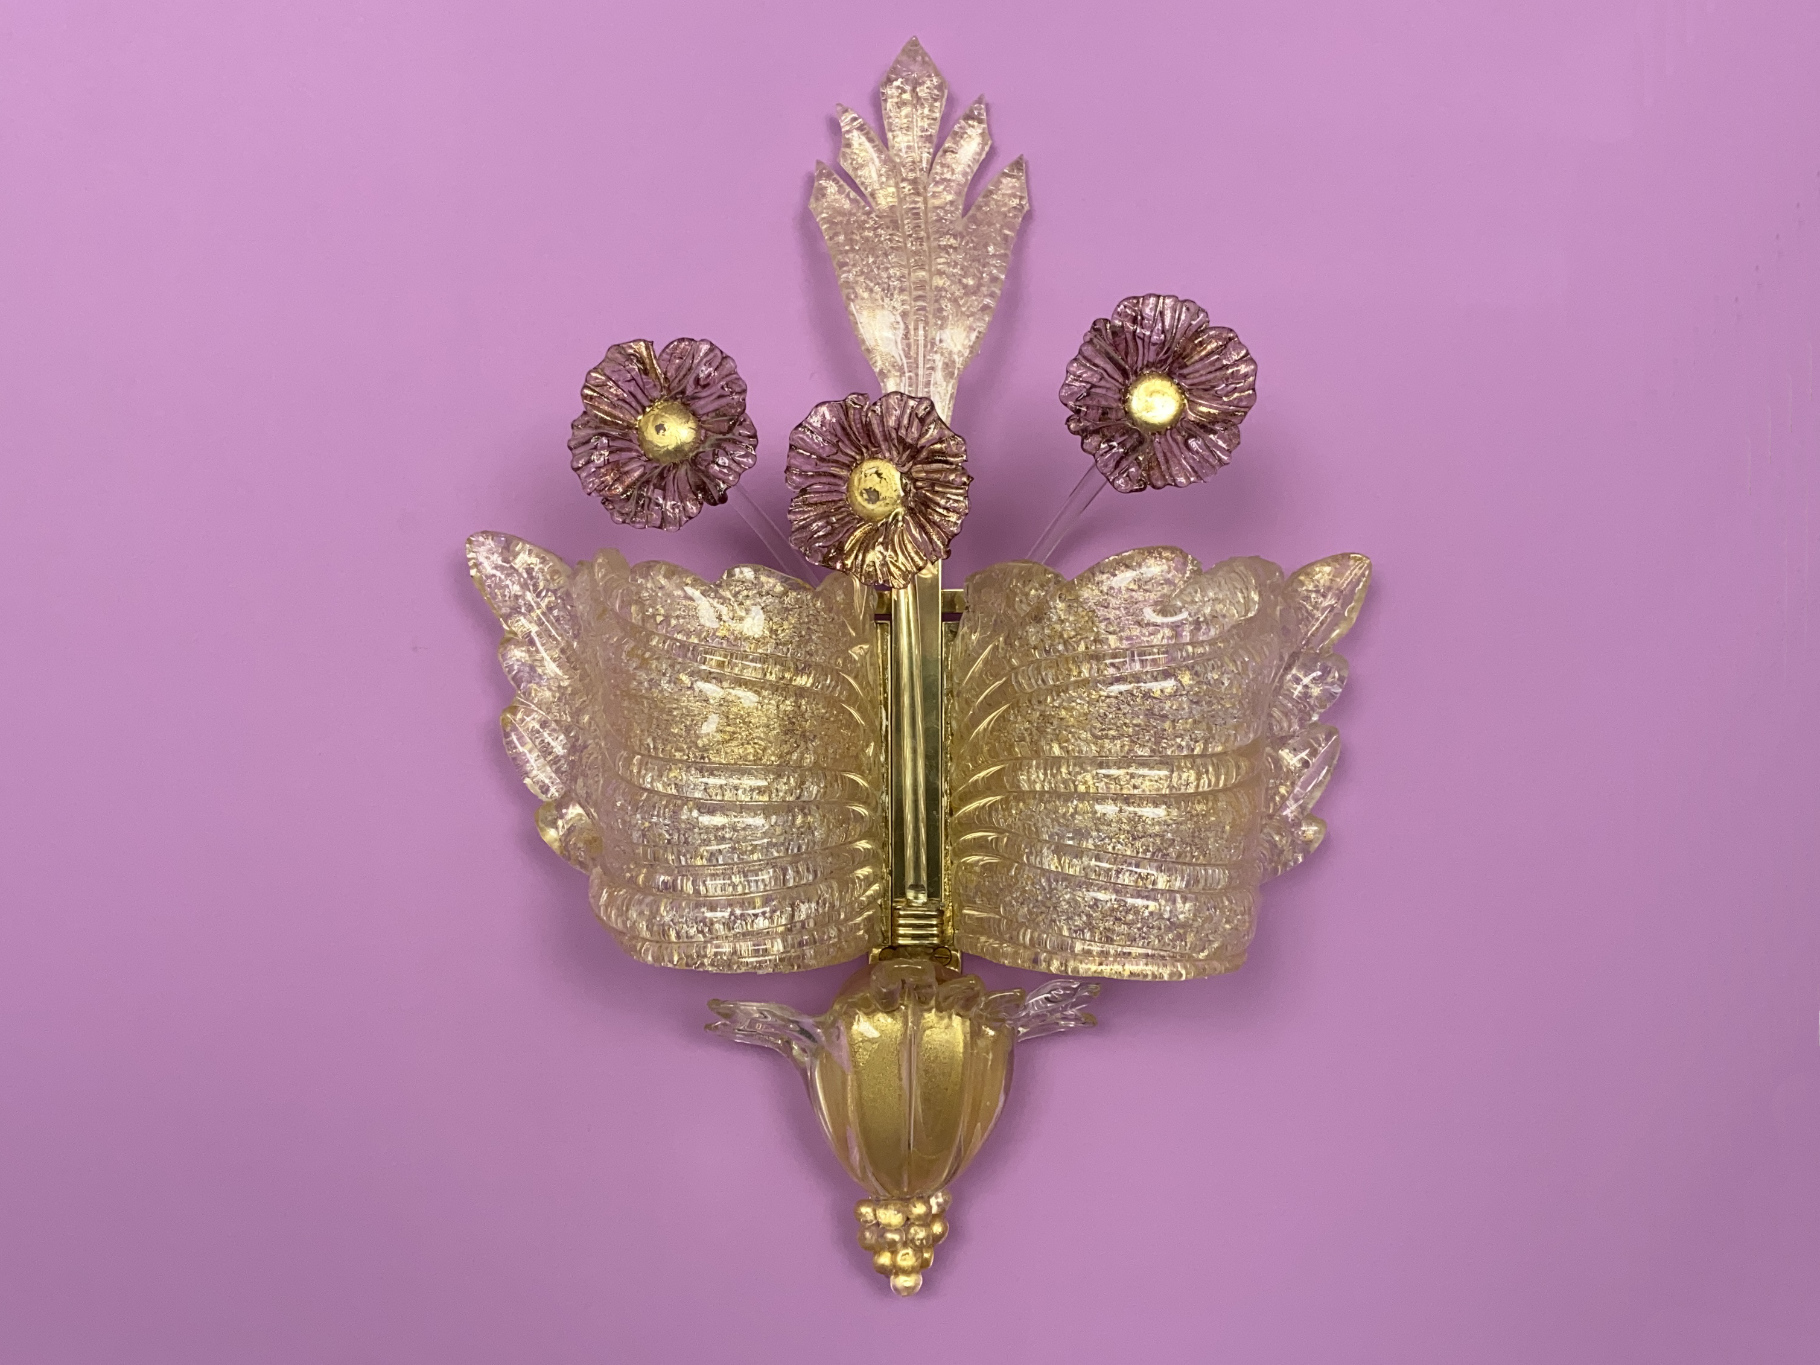 Sconce “Grand Hotel“ by Barovier & Toso, Murano, Italy, 1950s. Glass from Murano, Venice with Gold Dust and purple-colored Glass Flowers